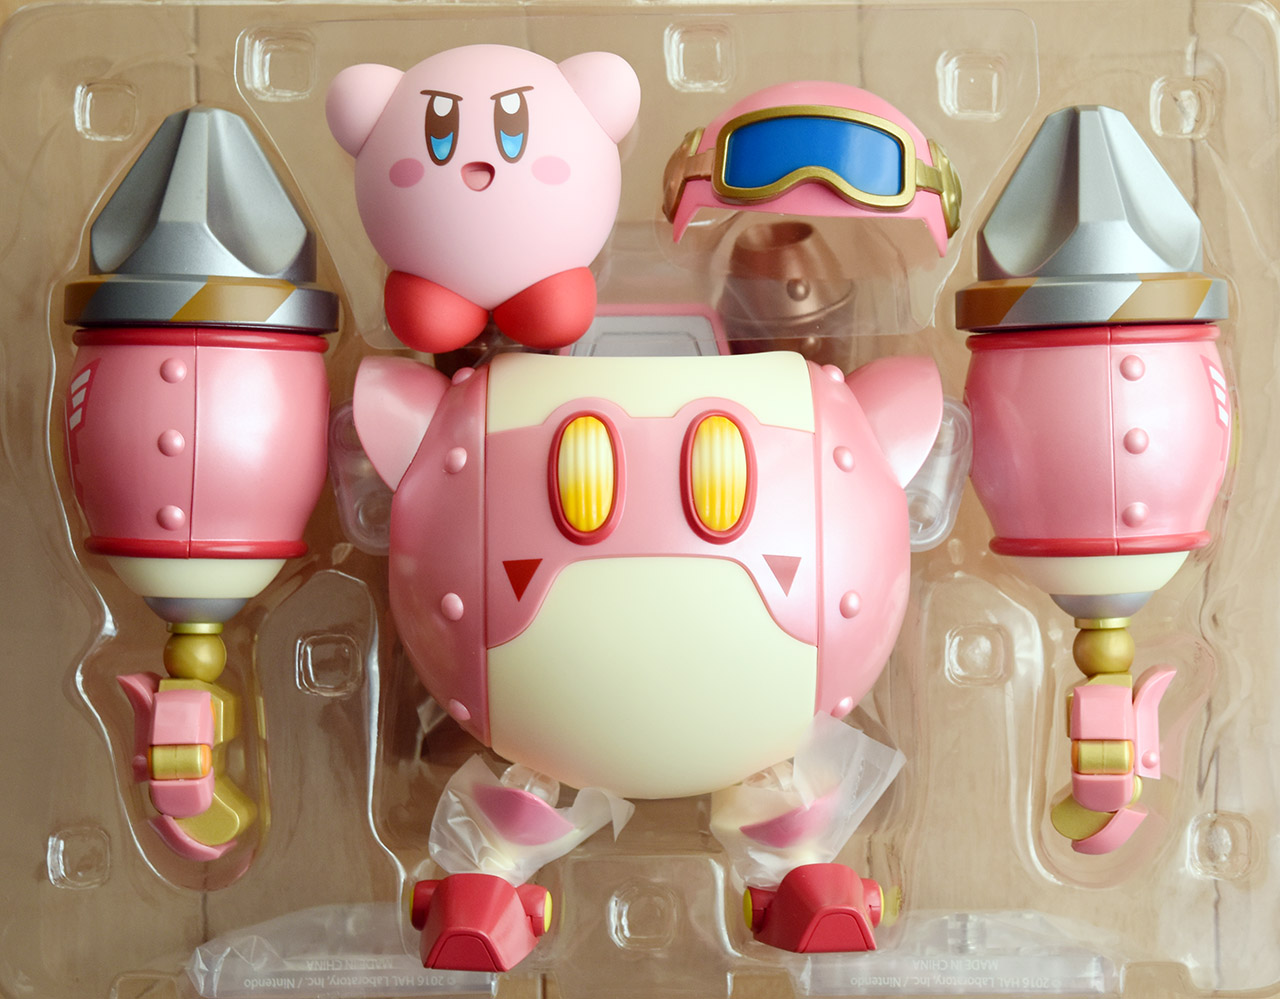 Nendoroid More: Robobot Armor & Kirby Unboxing 